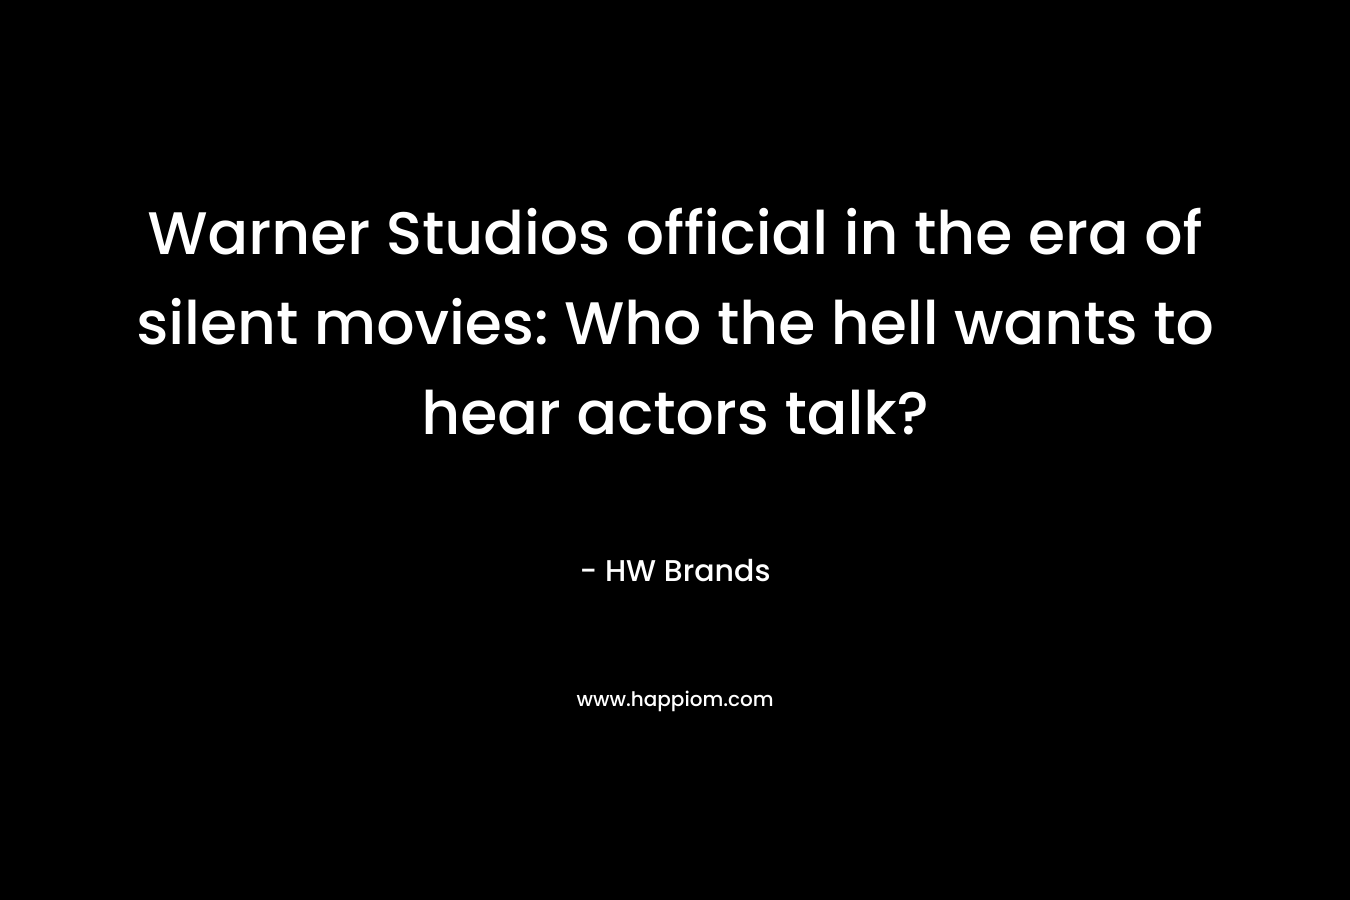 Warner Studios official in the era of silent movies: Who the hell wants to hear actors talk? – HW Brands